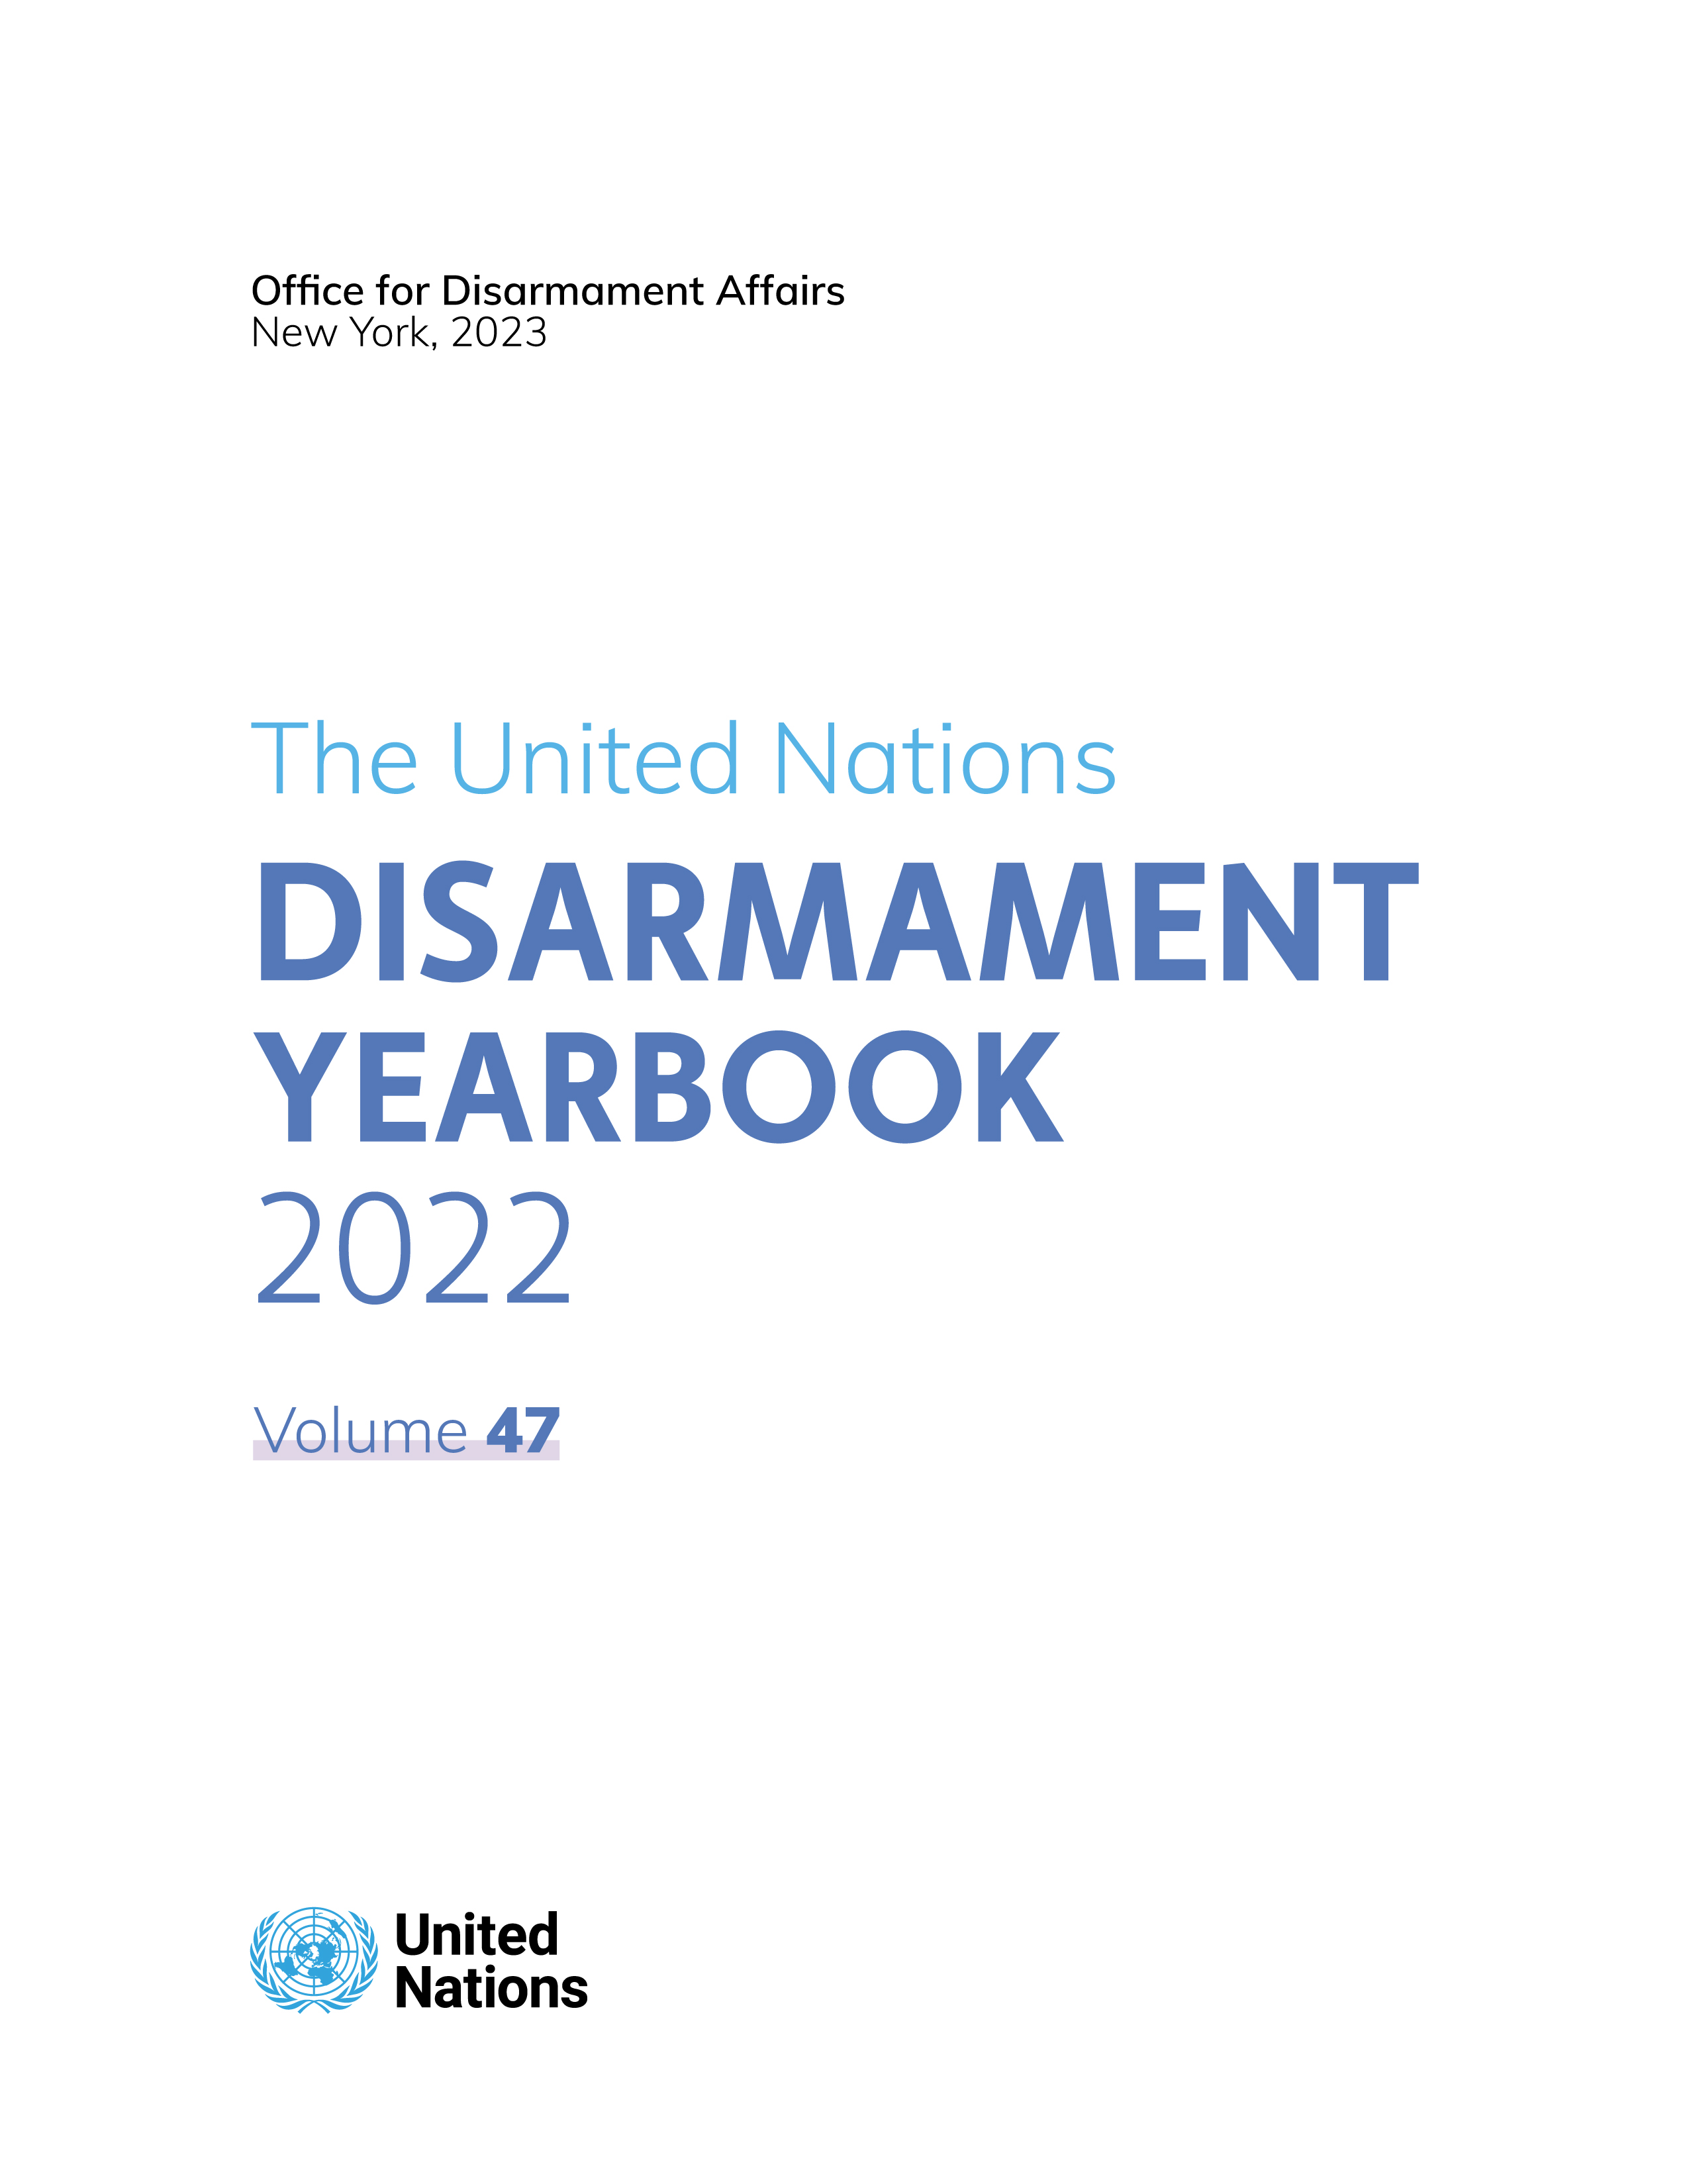 image of United Nations Disarmament Yearbook 2022